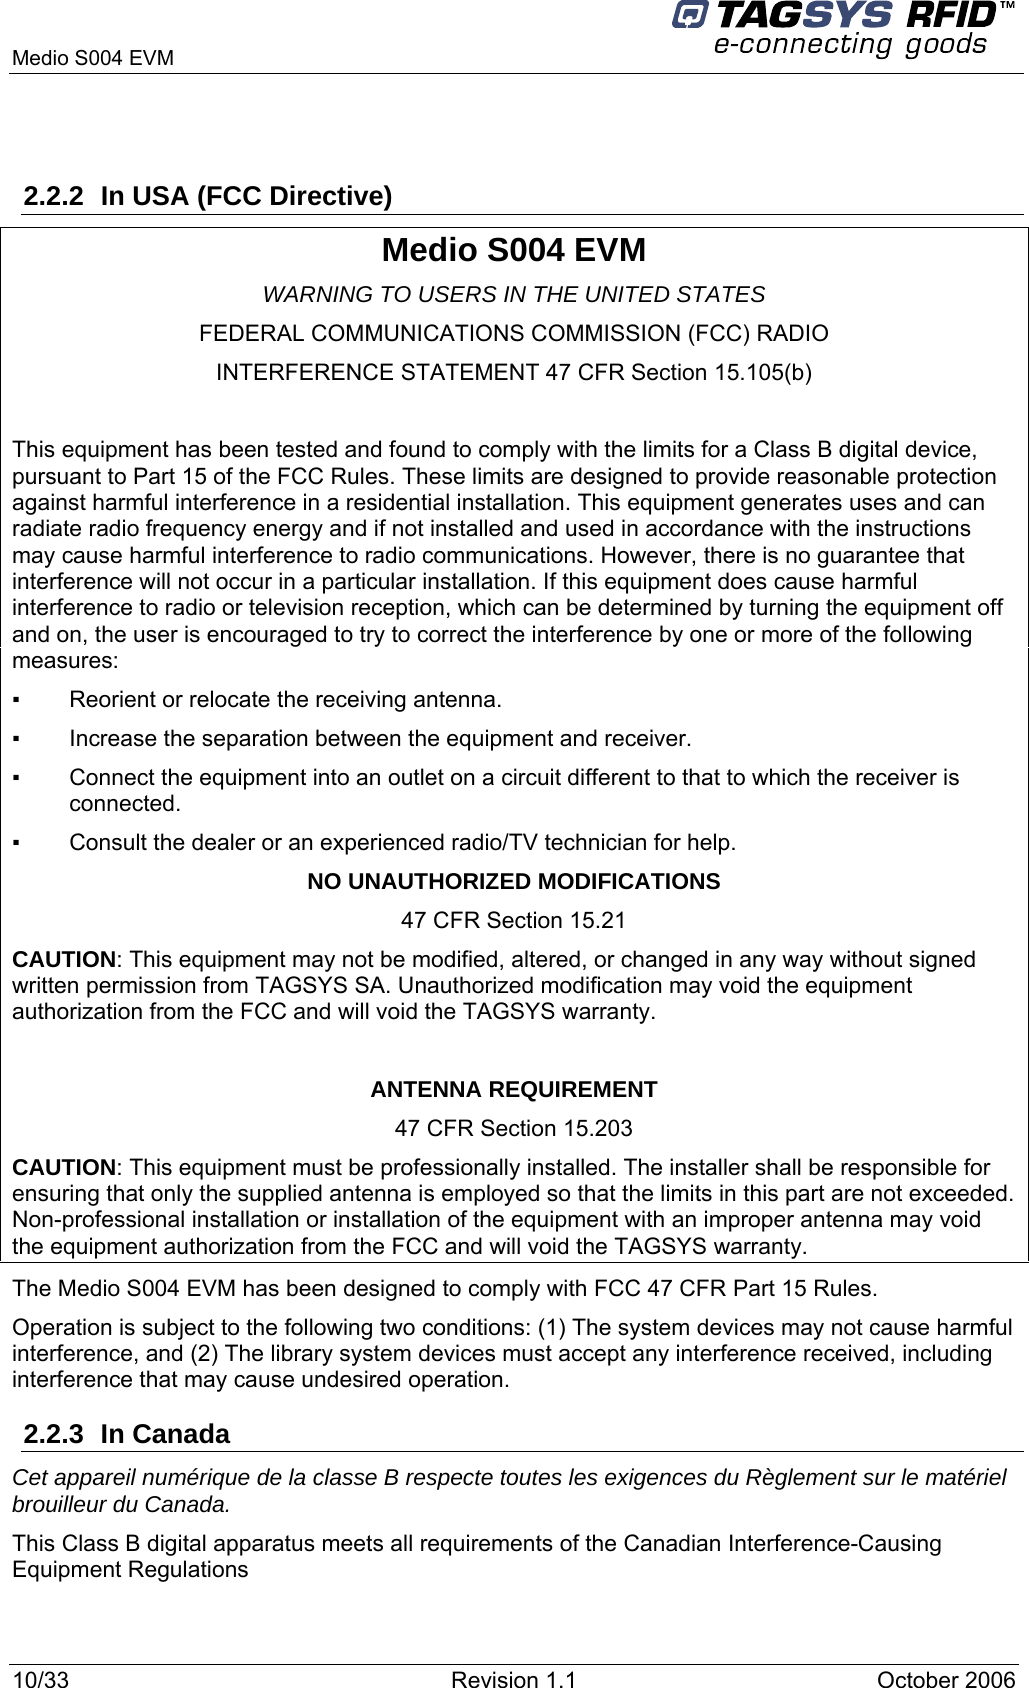   Medio S004 EVM  2.2.2  In USA (FCC Directive) Medio S004 EVM WARNING TO USERS IN THE UNITED STATES FEDERAL COMMUNICATIONS COMMISSION (FCC) RADIO INTERFERENCE STATEMENT 47 CFR Section 15.105(b)  This equipment has been tested and found to comply with the limits for a Class B digital device, pursuant to Part 15 of the FCC Rules. These limits are designed to provide reasonable protection against harmful interference in a residential installation. This equipment generates uses and can radiate radio frequency energy and if not installed and used in accordance with the instructions may cause harmful interference to radio communications. However, there is no guarantee that interference will not occur in a particular installation. If this equipment does cause harmful interference to radio or television reception, which can be determined by turning the equipment off and on, the user is encouraged to try to correct the interference by one or more of the following measures:  ▪   Reorient or relocate the receiving antenna. ▪   Increase the separation between the equipment and receiver. ▪   Connect the equipment into an outlet on a circuit different to that to which the receiver is connected. ▪   Consult the dealer or an experienced radio/TV technician for help. NO UNAUTHORIZED MODIFICATIONS 47 CFR Section 15.21 CAUTION: This equipment may not be modified, altered, or changed in any way without signed written permission from TAGSYS SA. Unauthorized modification may void the equipment authorization from the FCC and will void the TAGSYS warranty.  ANTENNA REQUIREMENT 47 CFR Section 15.203 CAUTION: This equipment must be professionally installed. The installer shall be responsible for ensuring that only the supplied antenna is employed so that the limits in this part are not exceeded. Non-professional installation or installation of the equipment with an improper antenna may void the equipment authorization from the FCC and will void the TAGSYS warranty. The Medio S004 EVM has been designed to comply with FCC 47 CFR Part 15 Rules. Operation is subject to the following two conditions: (1) The system devices may not cause harmful interference, and (2) The library system devices must accept any interference received, including interference that may cause undesired operation. 2.2.3 In Canada Cet appareil numérique de la classe B respecte toutes les exigences du Règlement sur le matériel brouilleur du Canada. This Class B digital apparatus meets all requirements of the Canadian Interference-Causing Equipment Regulations 10/33  Revision 1.1   October 2006 